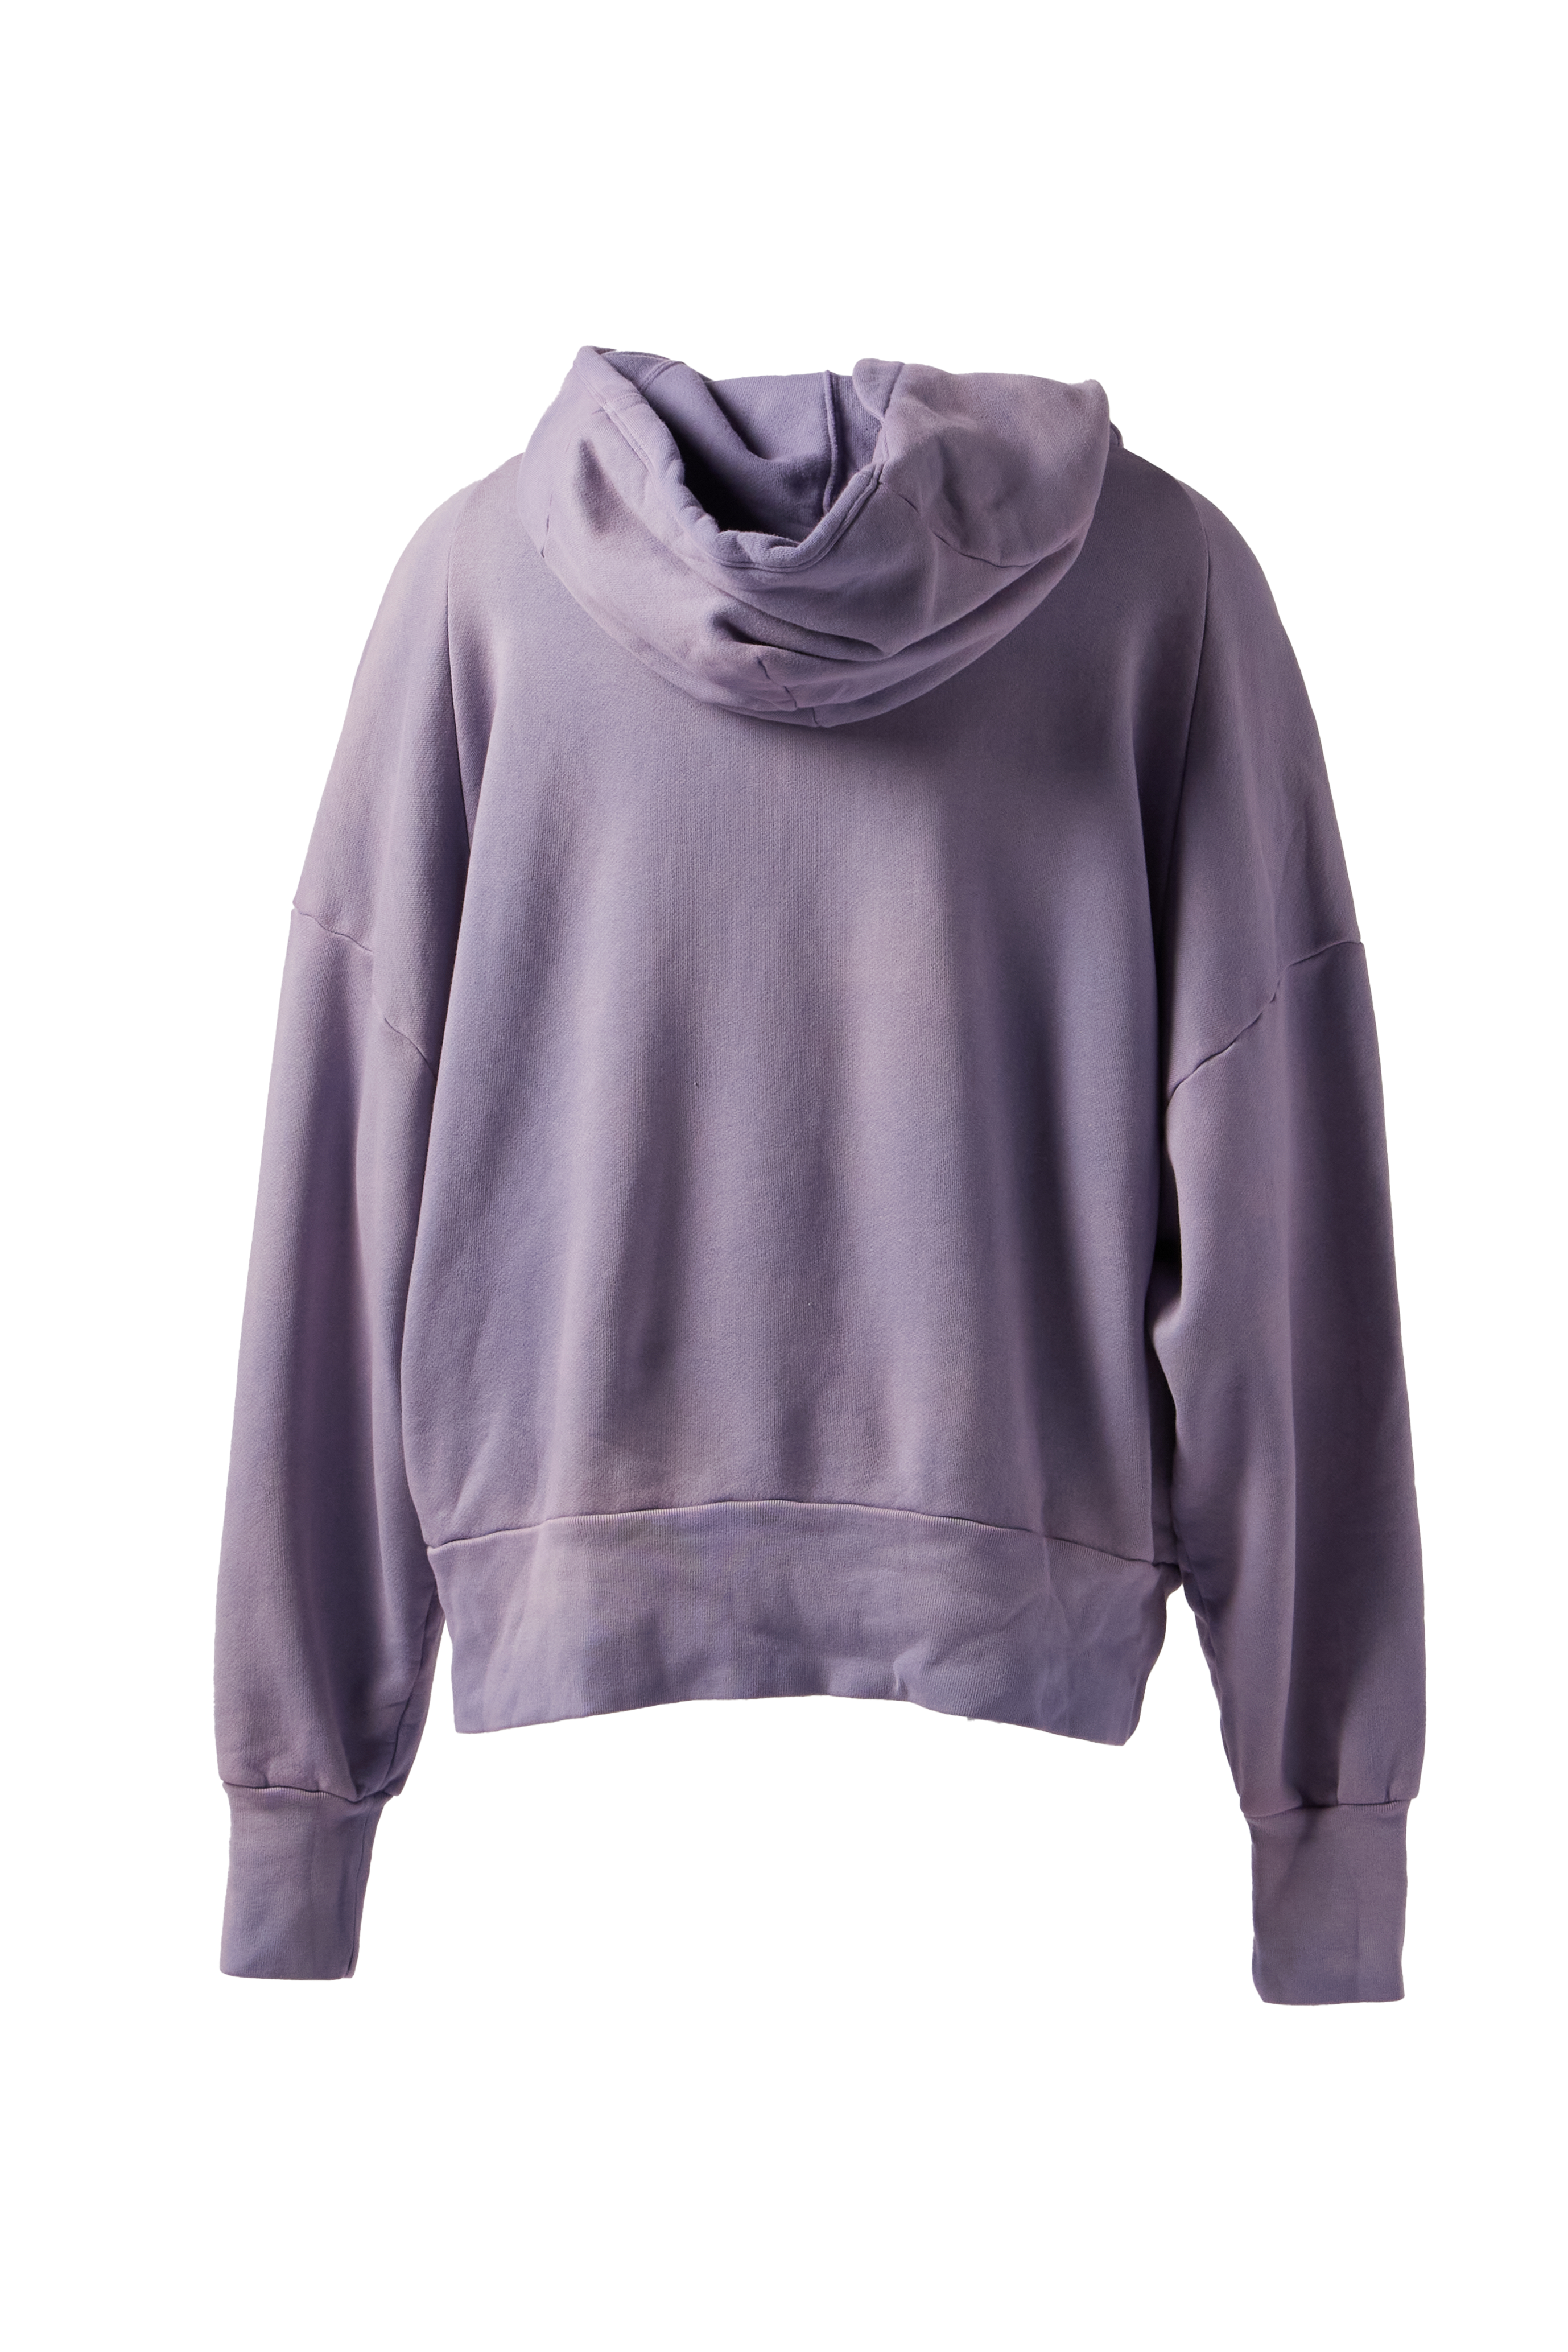 RRR123 - Gnostic Hoodie product image